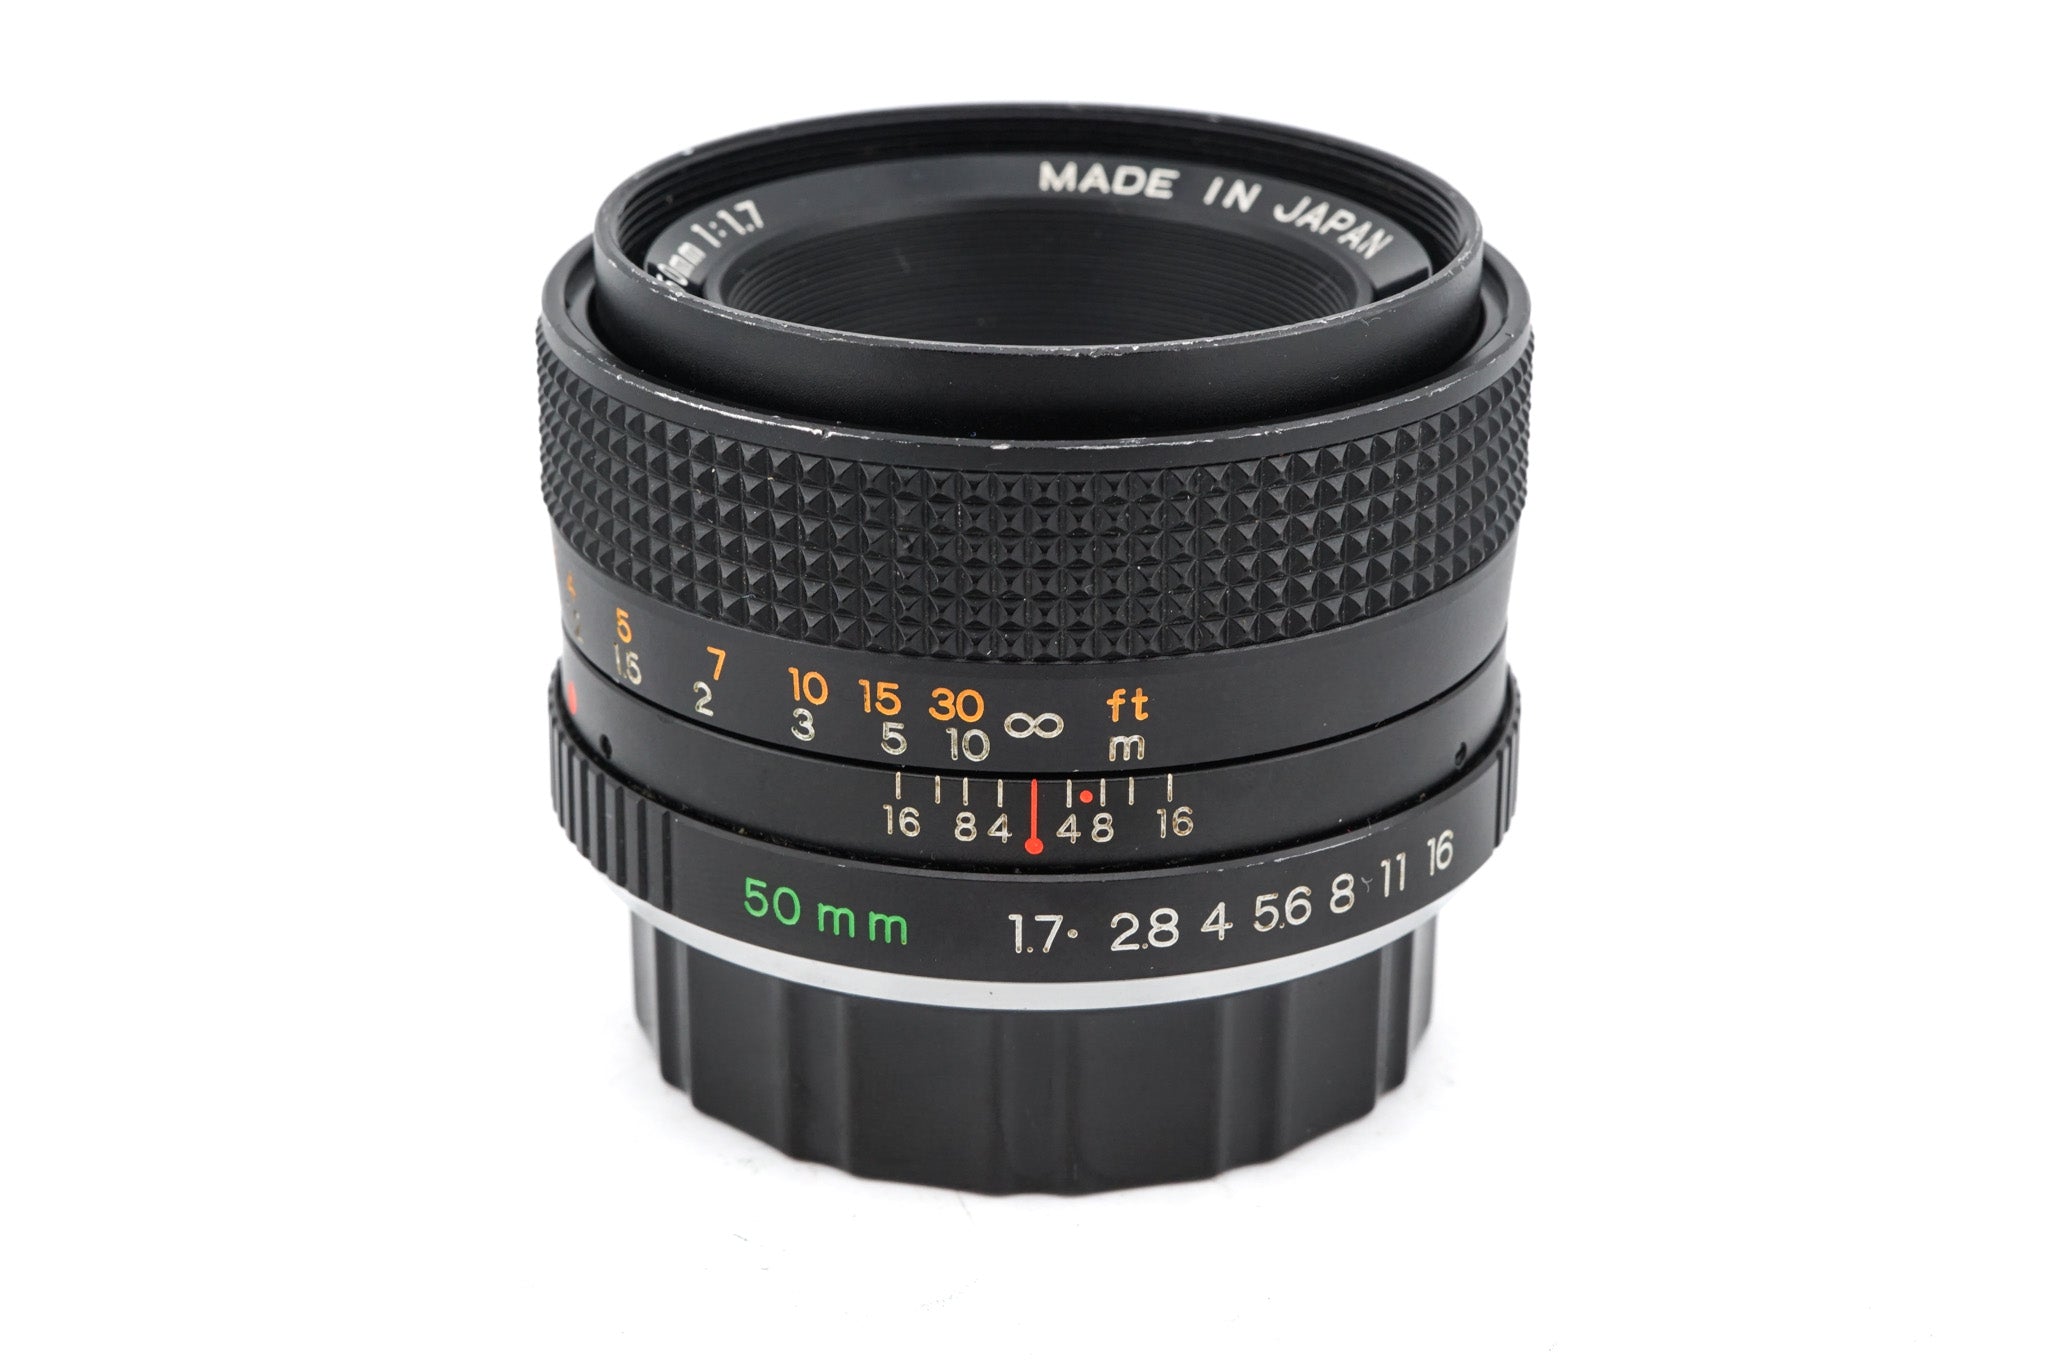 Carl Zeiss 28mm f2.8 Distagon T* - Lens